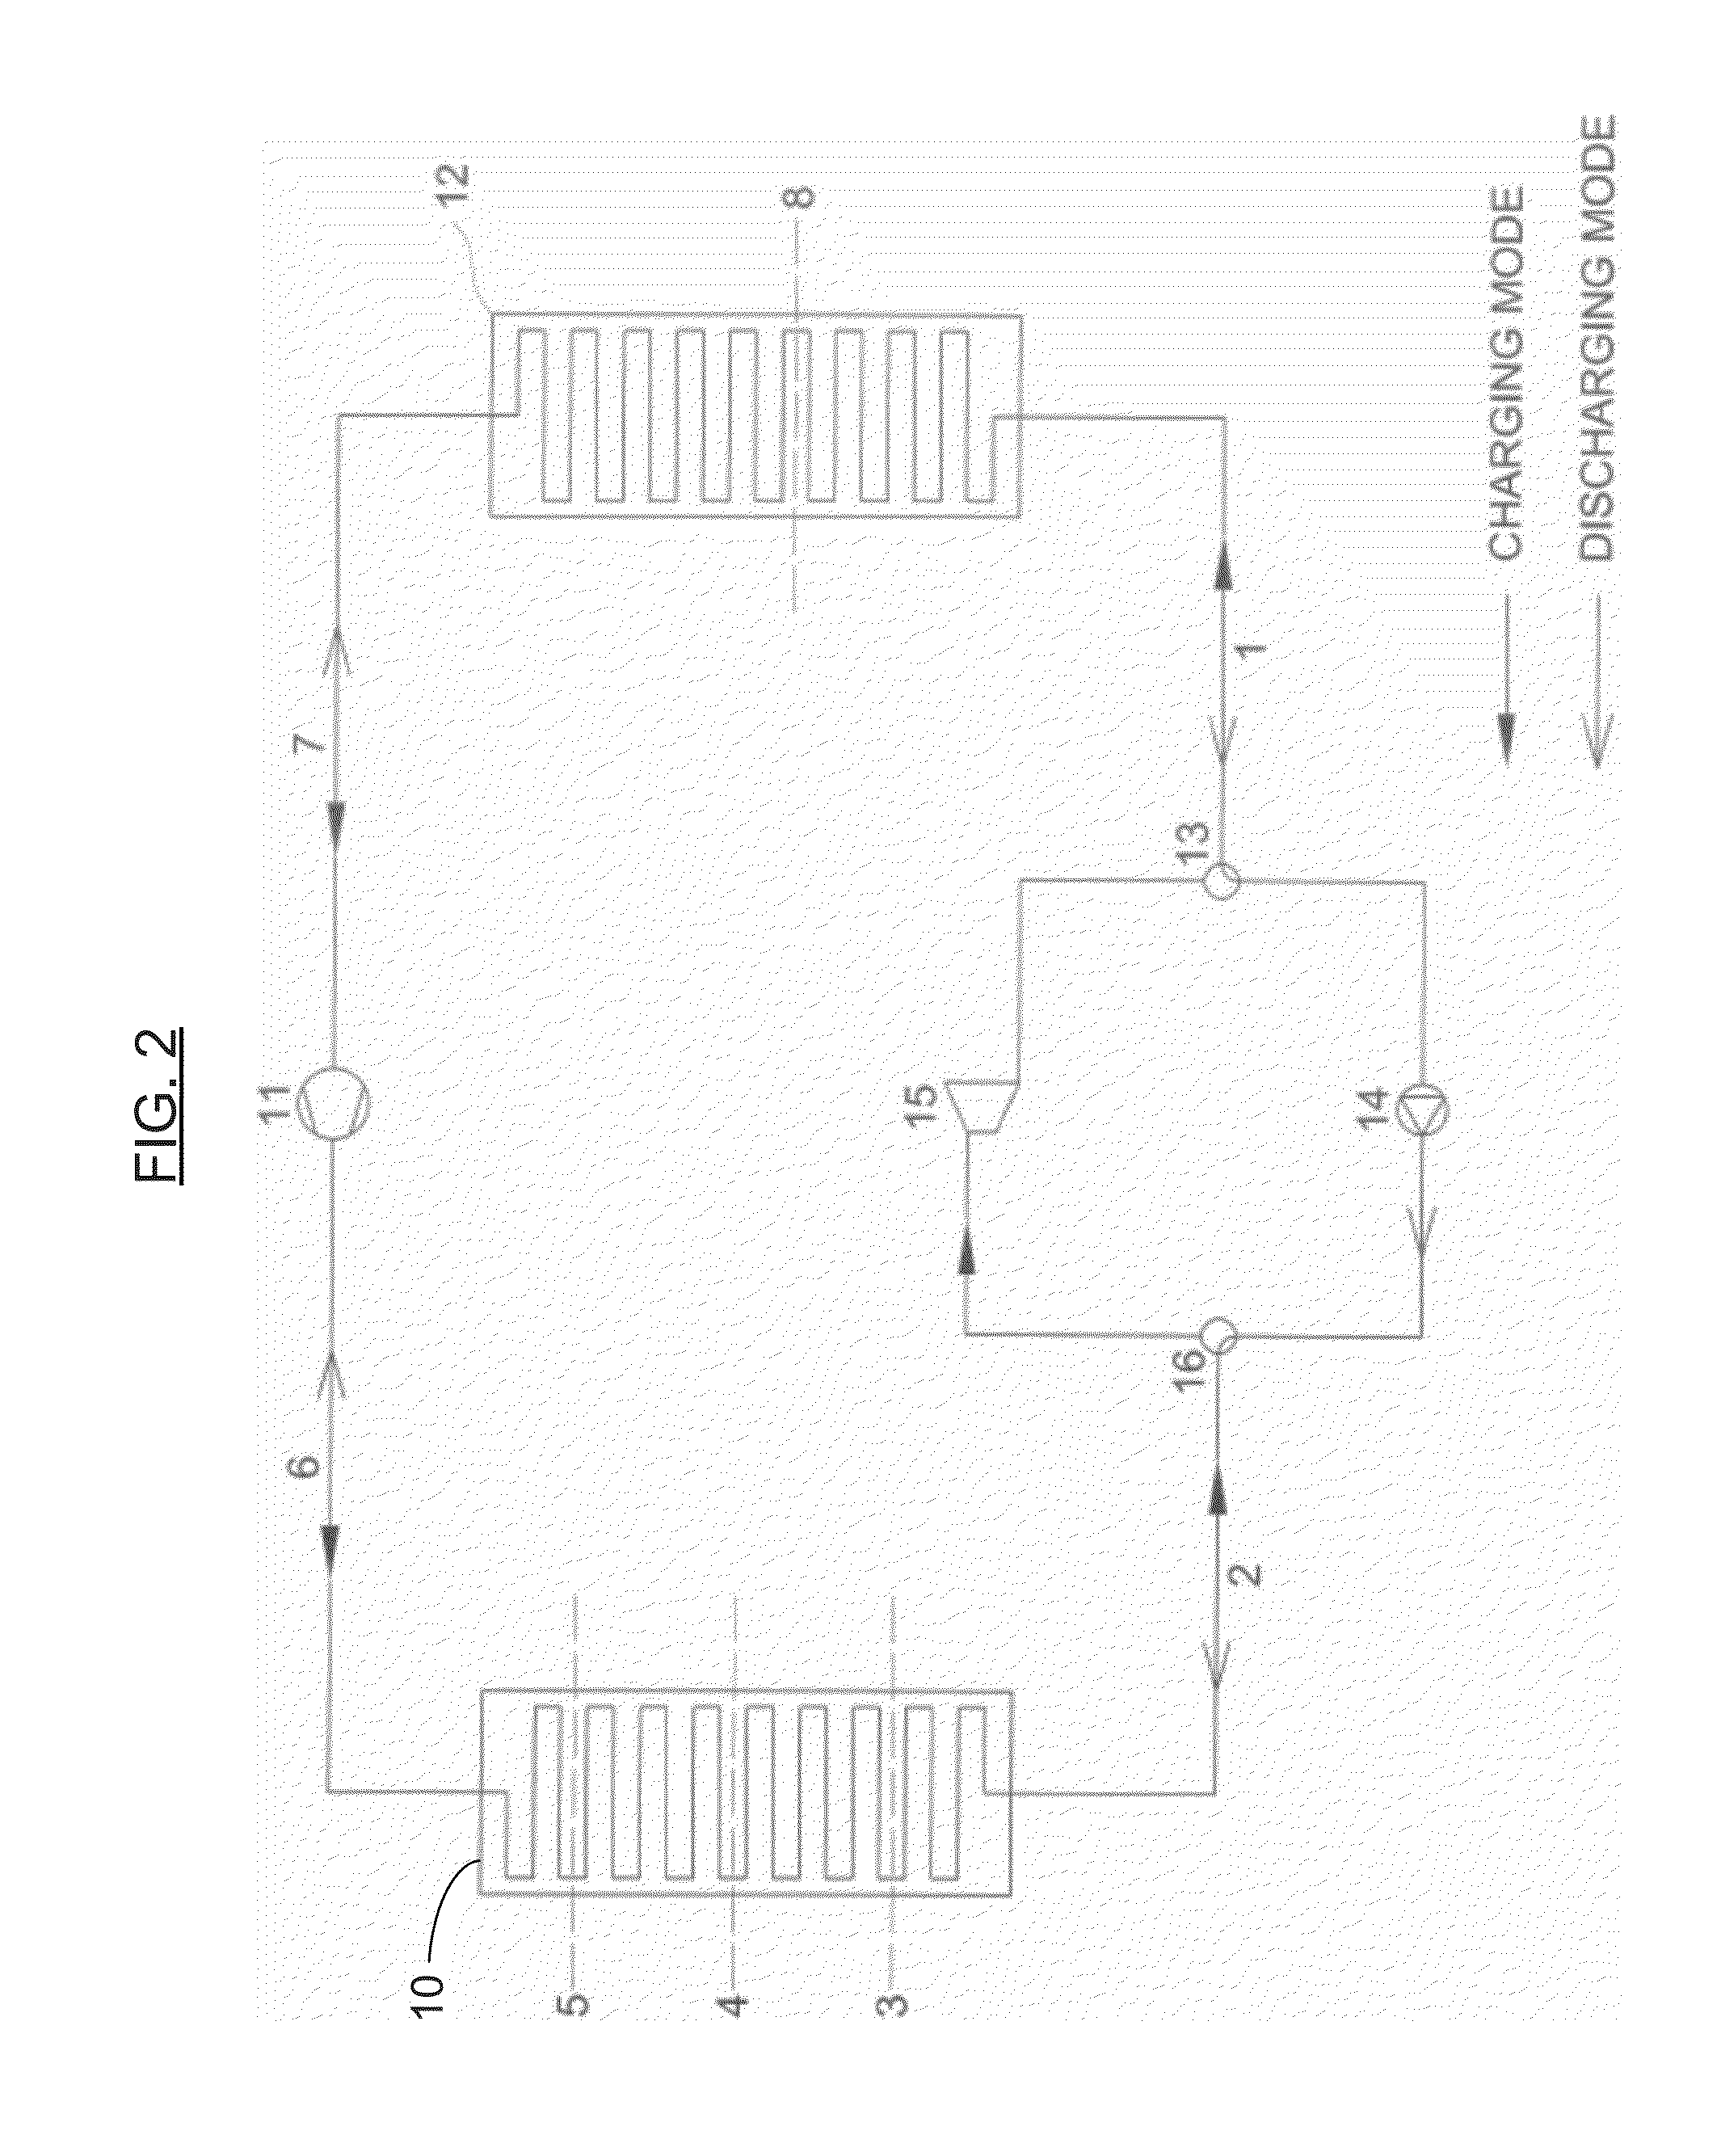 Apparatus, system, and methods for mechanical energy regeneration